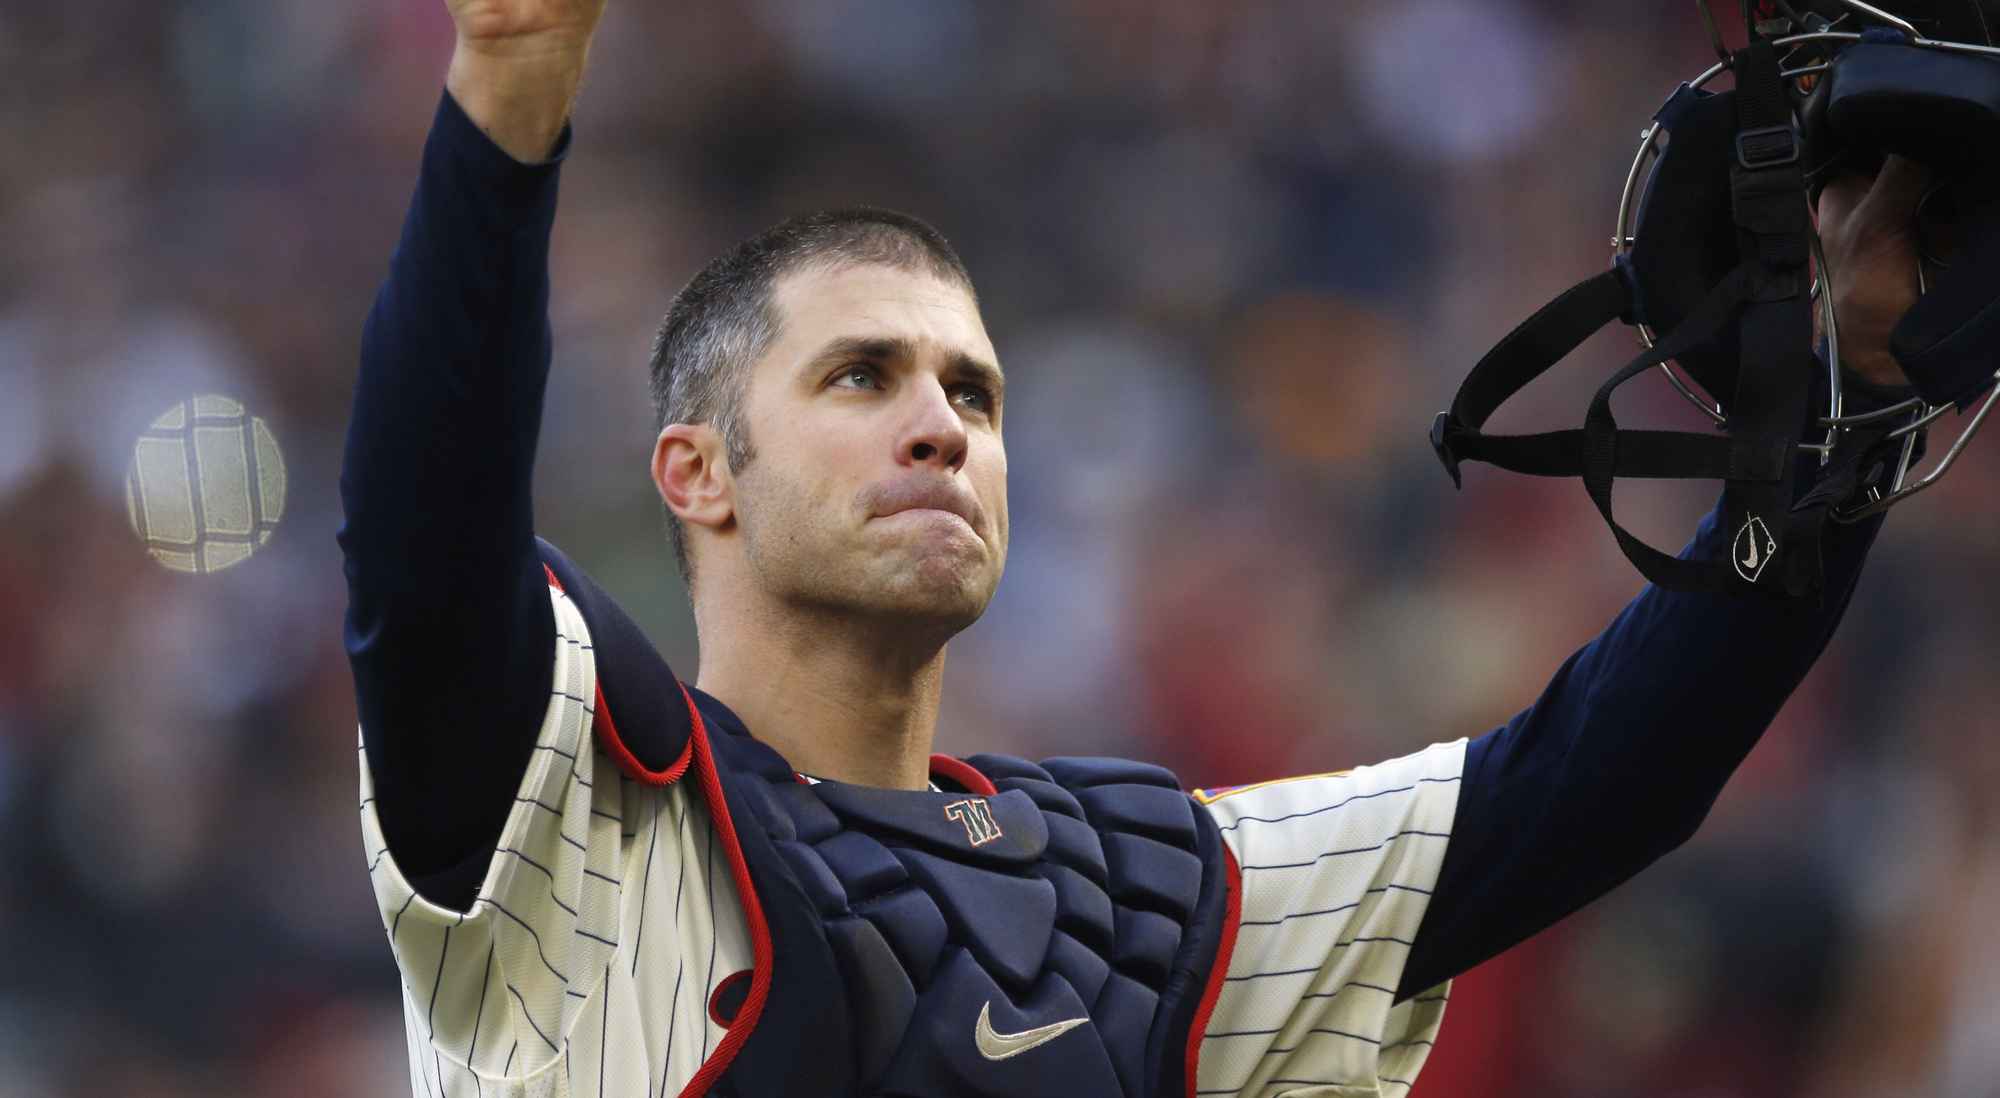 Joe Mauer acknowledges a standing ovation as he donned catcher’s gear and caught for one pitch against the Chicago White Sox